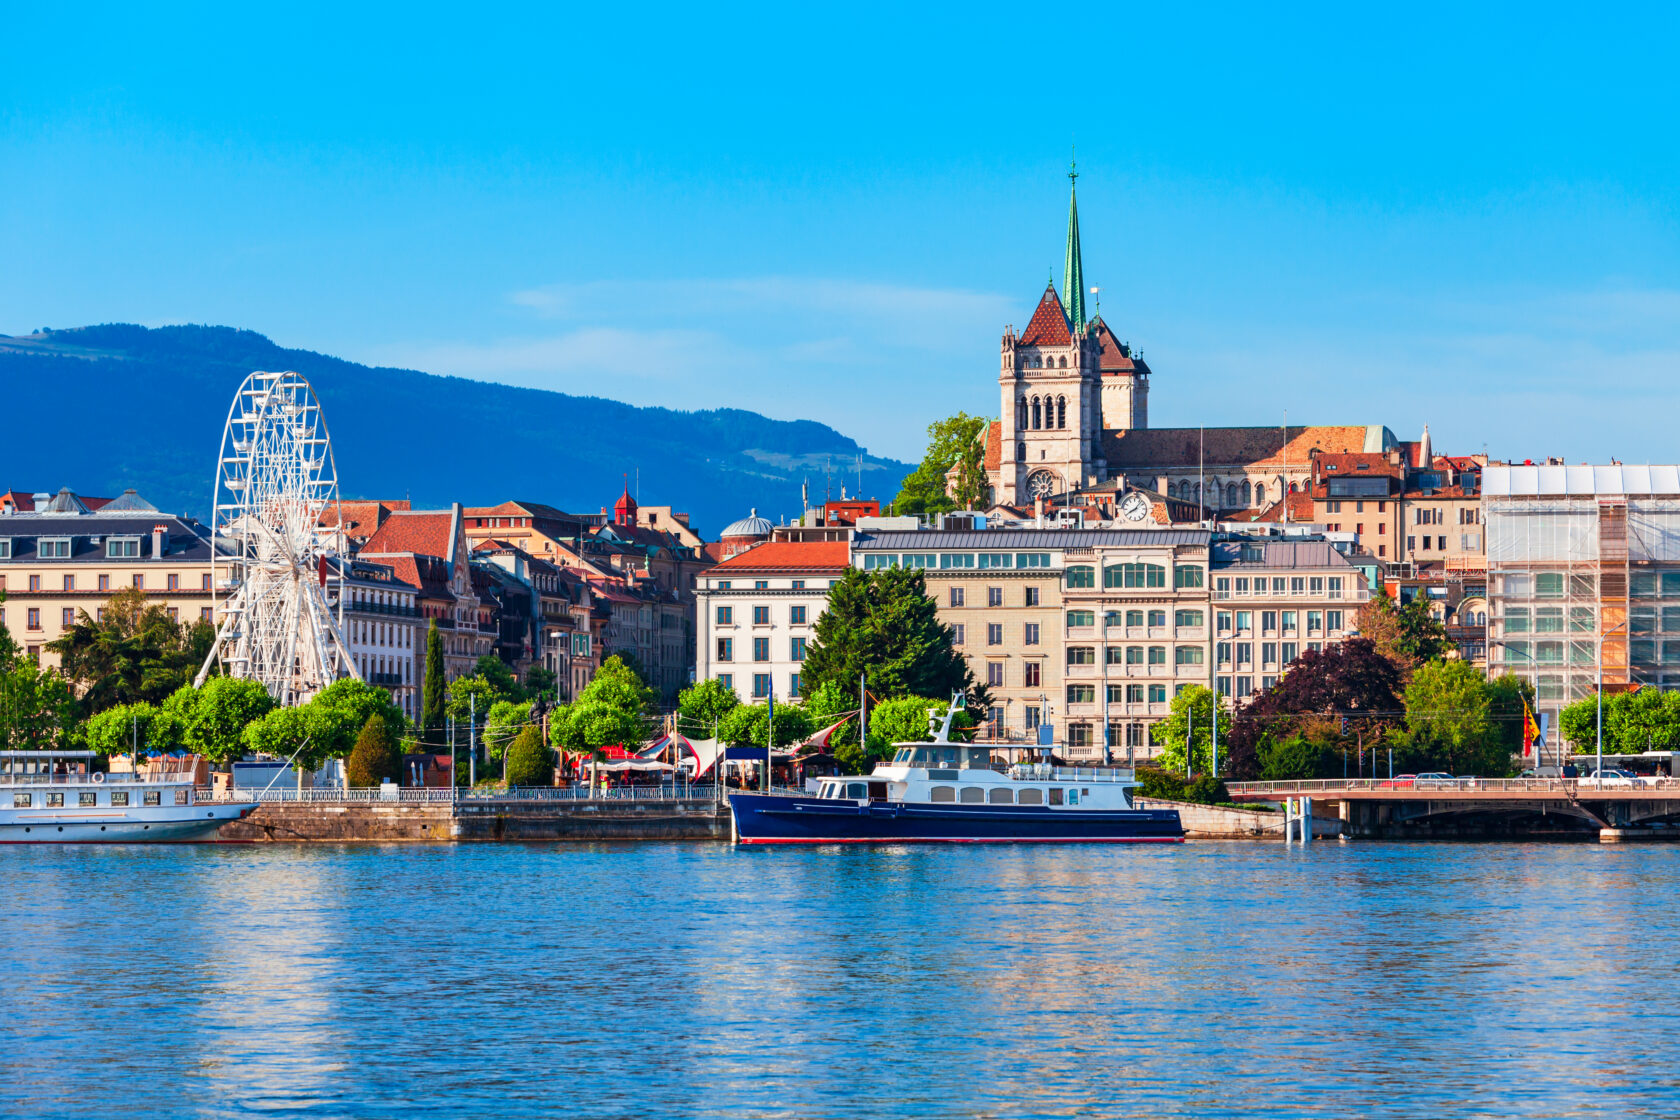 A view from the water of Geneva, Switzerland (an Atlantis site).